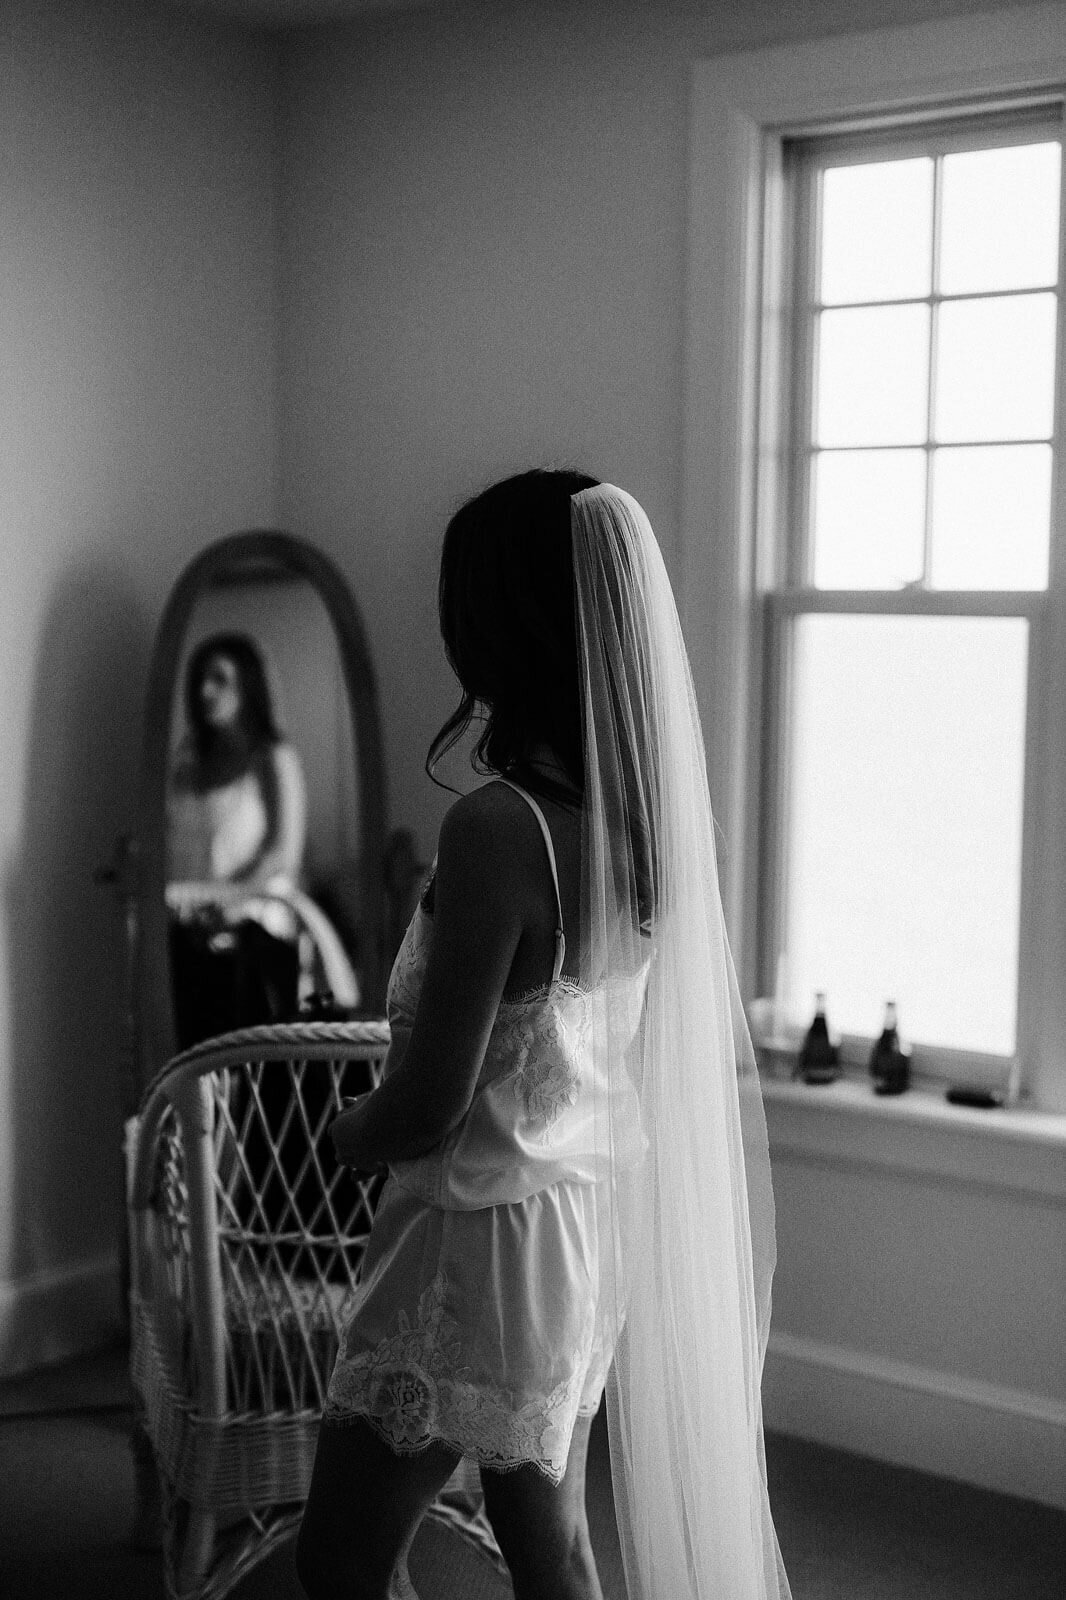 The bride is standing in a room, her reflection is shown in the mirror, at Wianno Club, Cape Cod, MA.